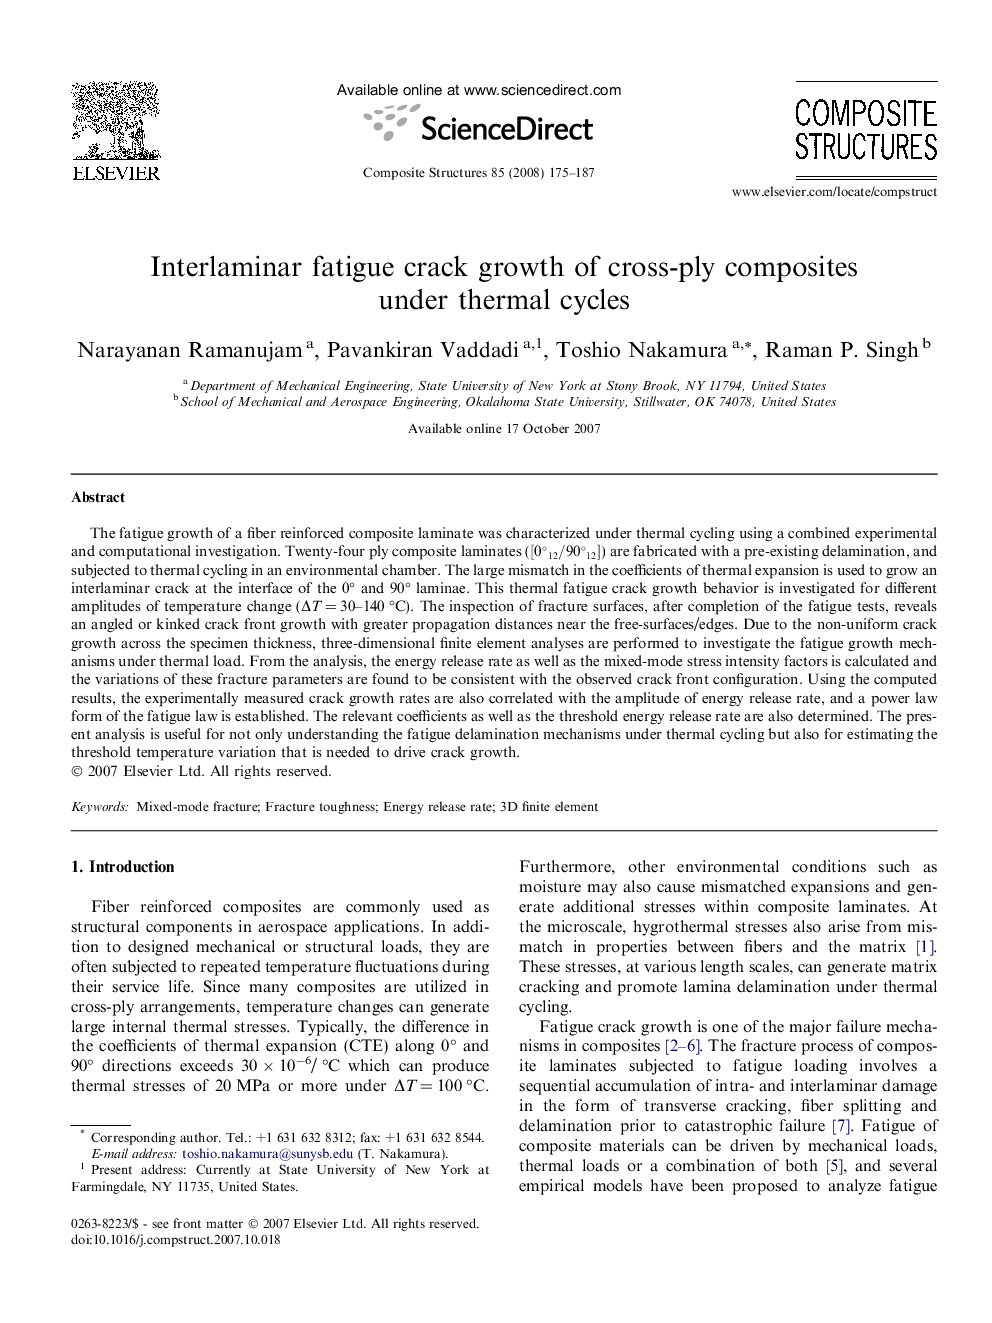 Interlaminar fatigue crack growth of cross-ply composites under thermal cycles